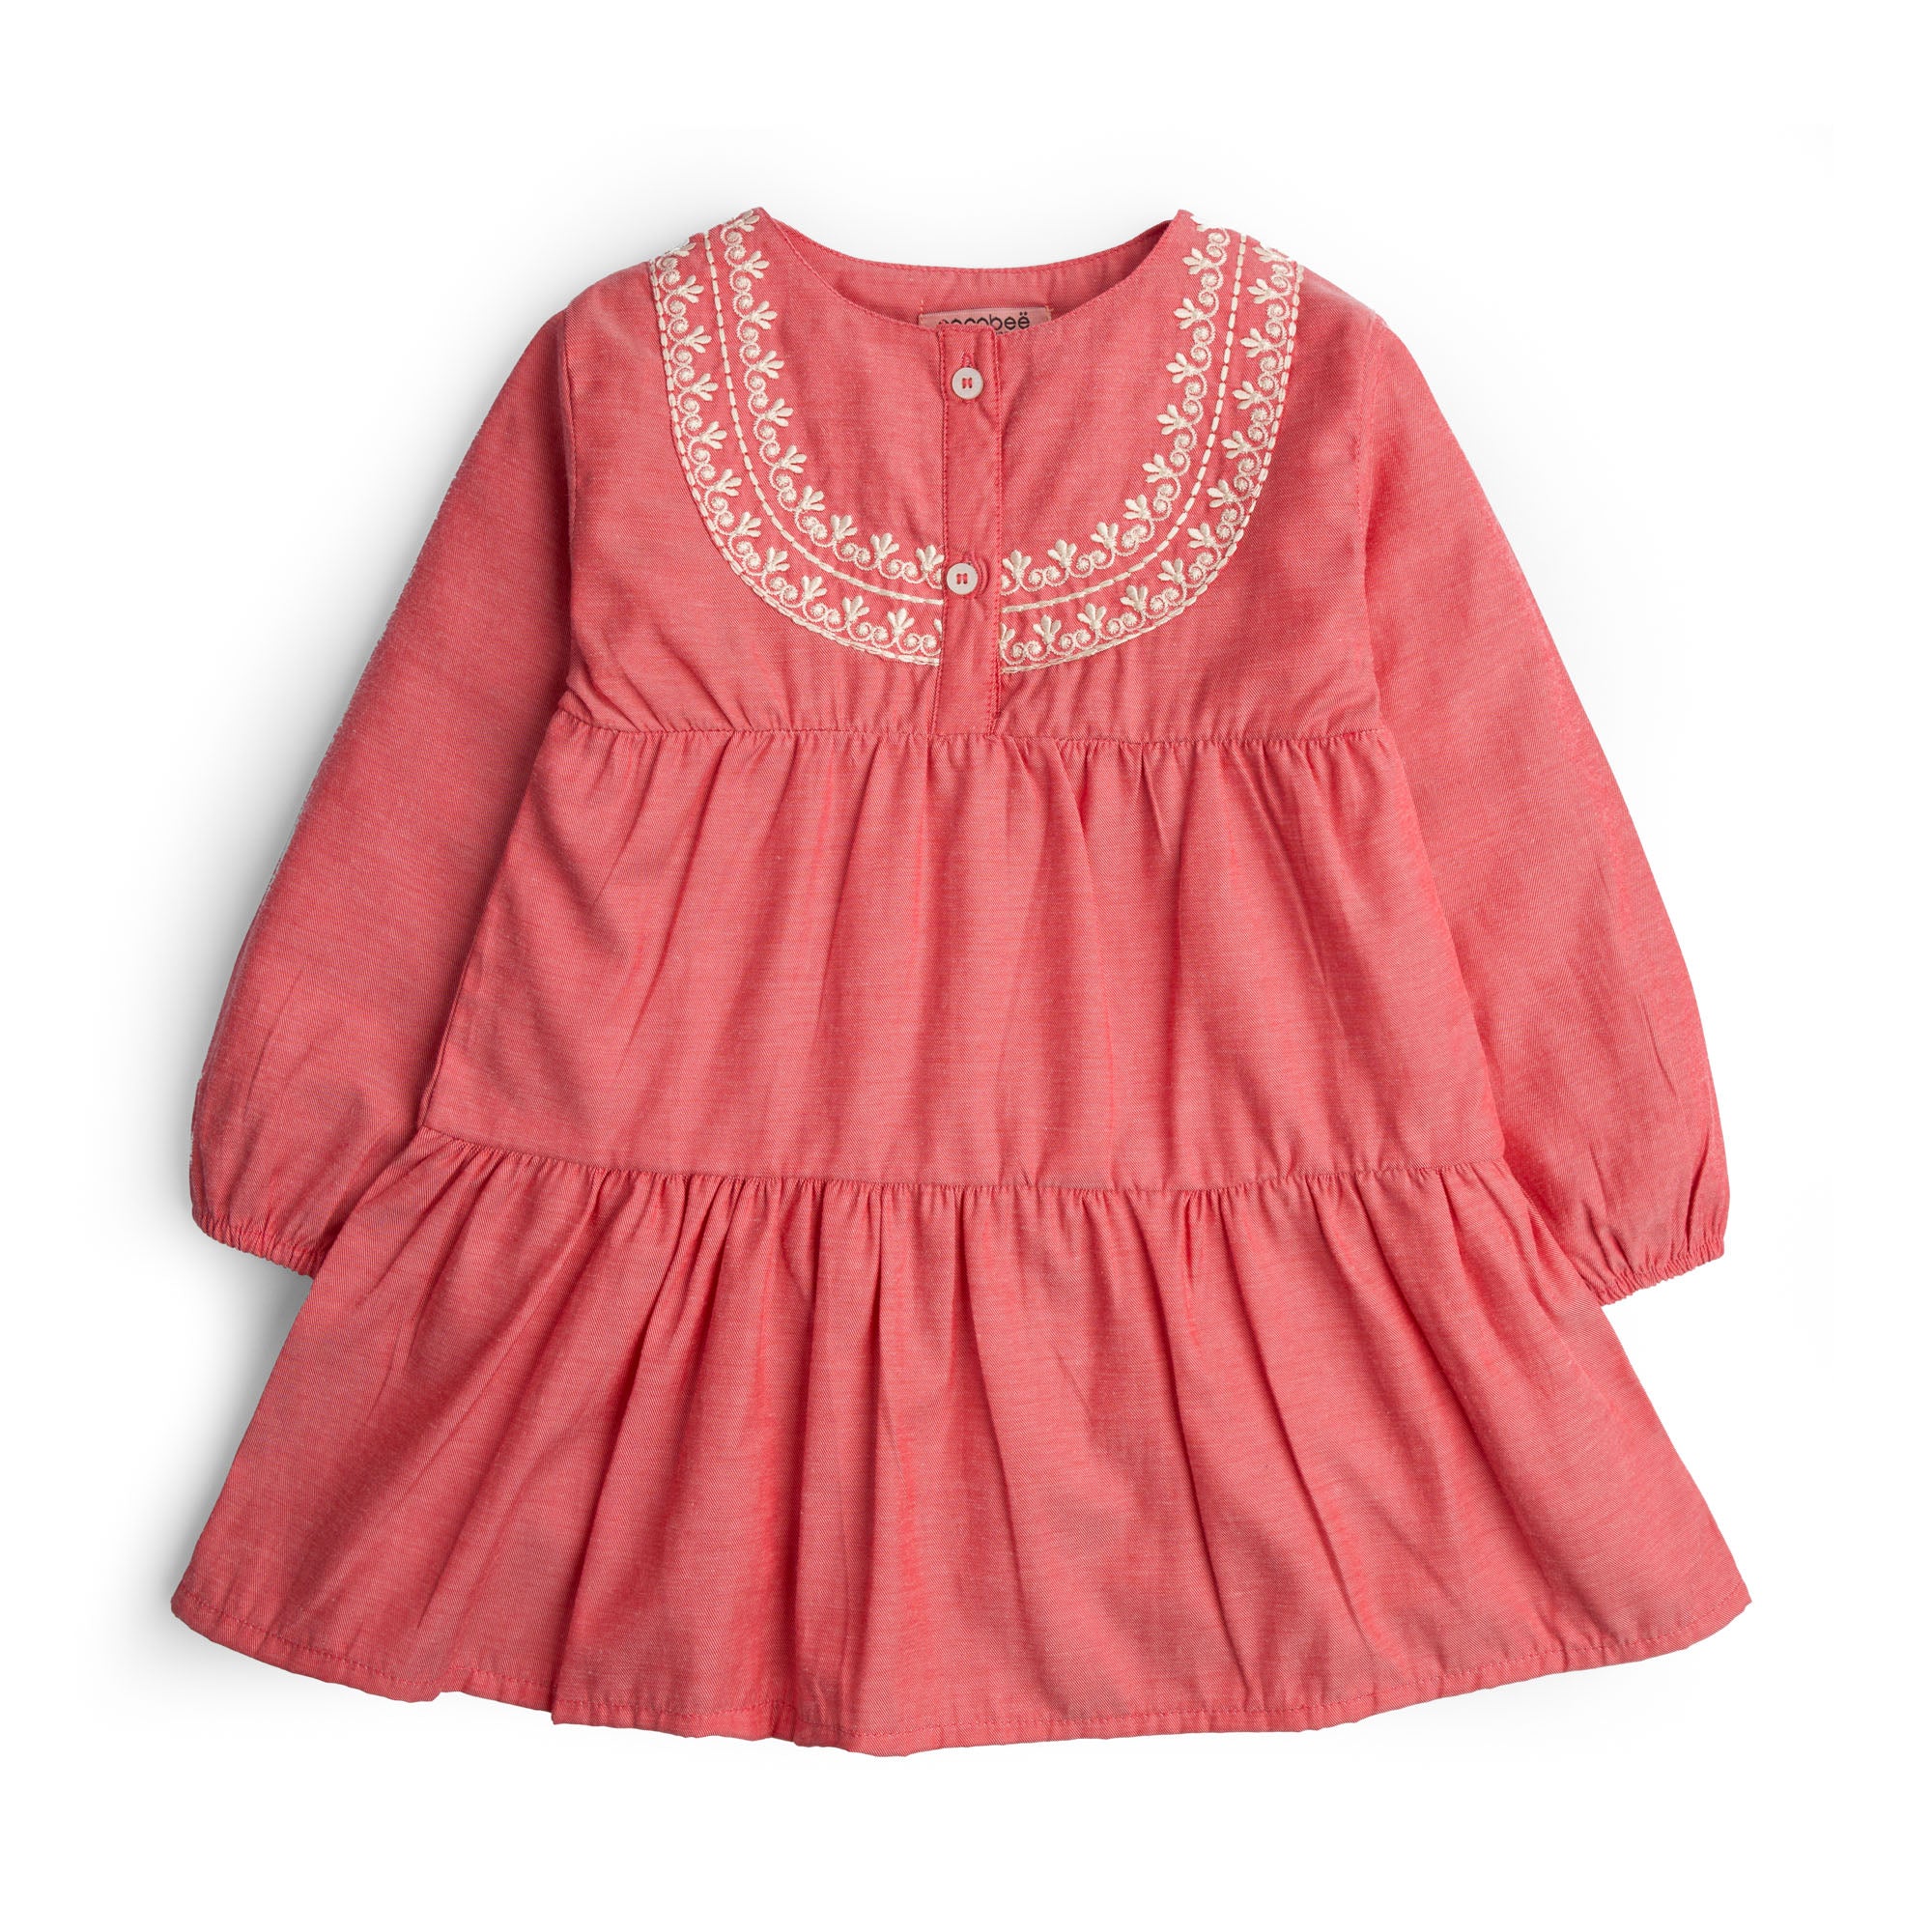 Pink Tiered Sewing Top